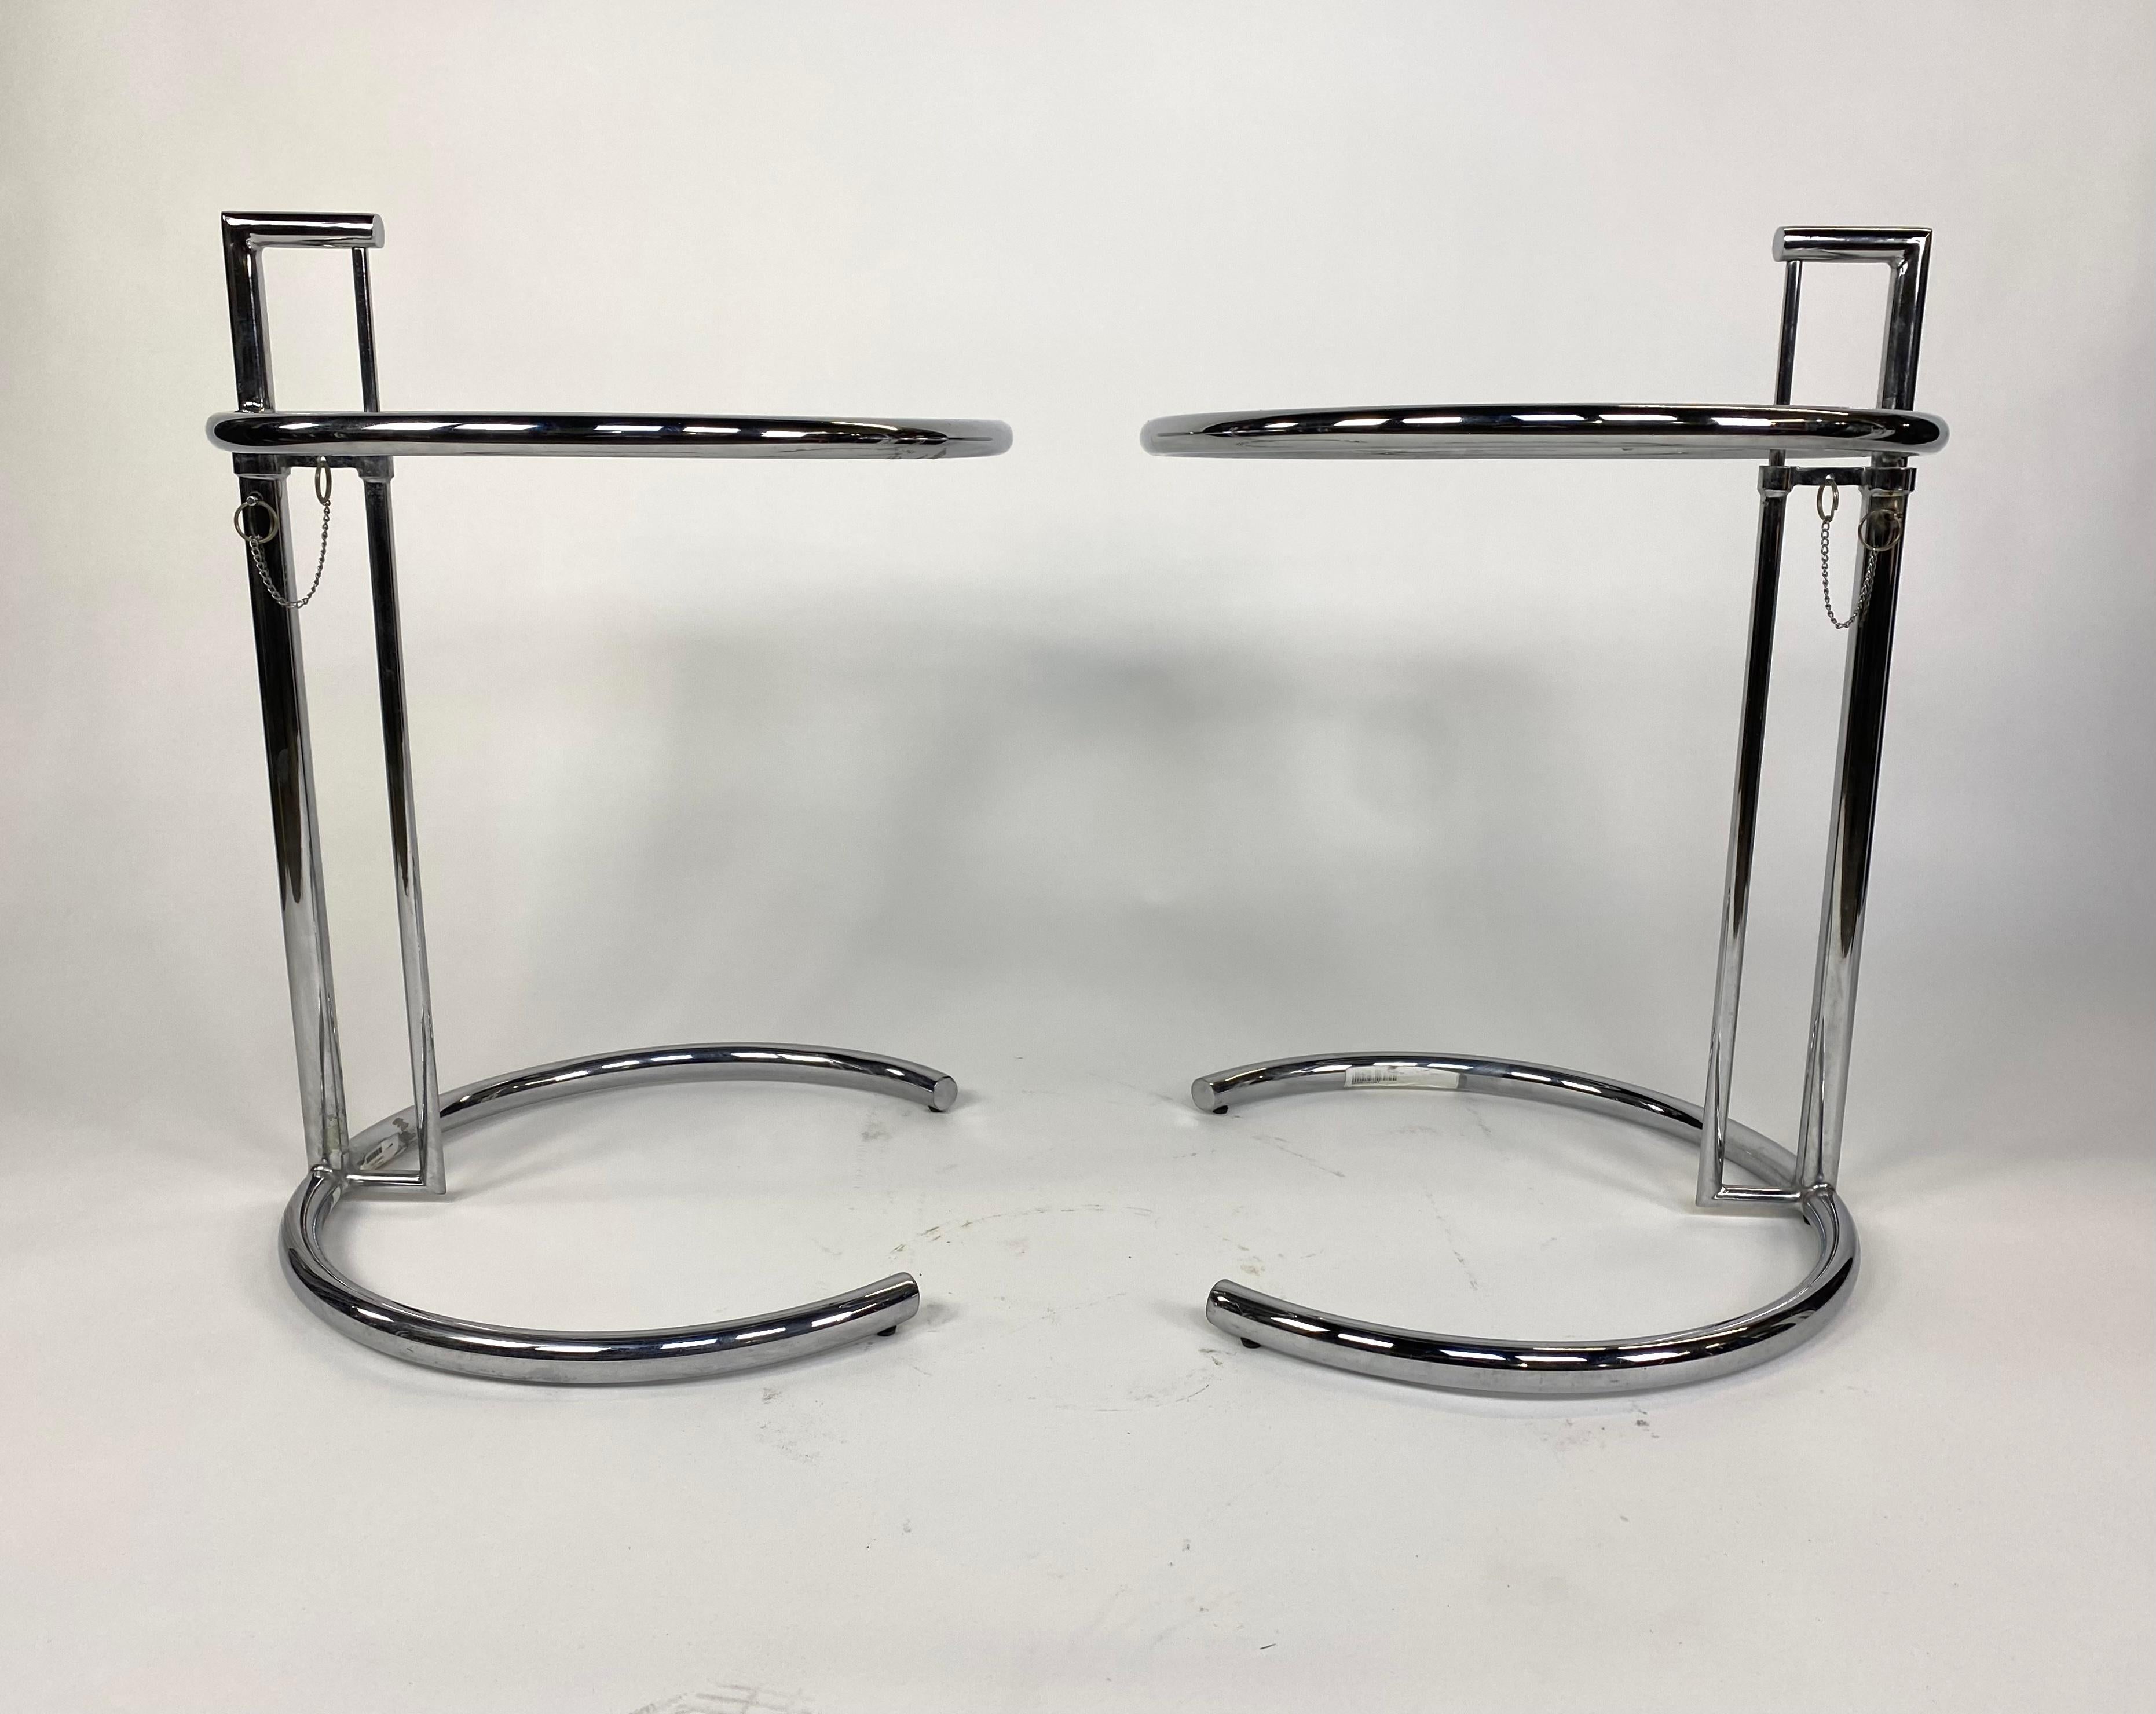 Pair of Mid-Century Modern adjustable height chrome cantilever side tables in the style of Eileen Gray E1027. Single tube chrome with glass table top. Cantilever design allows for variety of uses as a end table, tv table, or bed side tray table. The